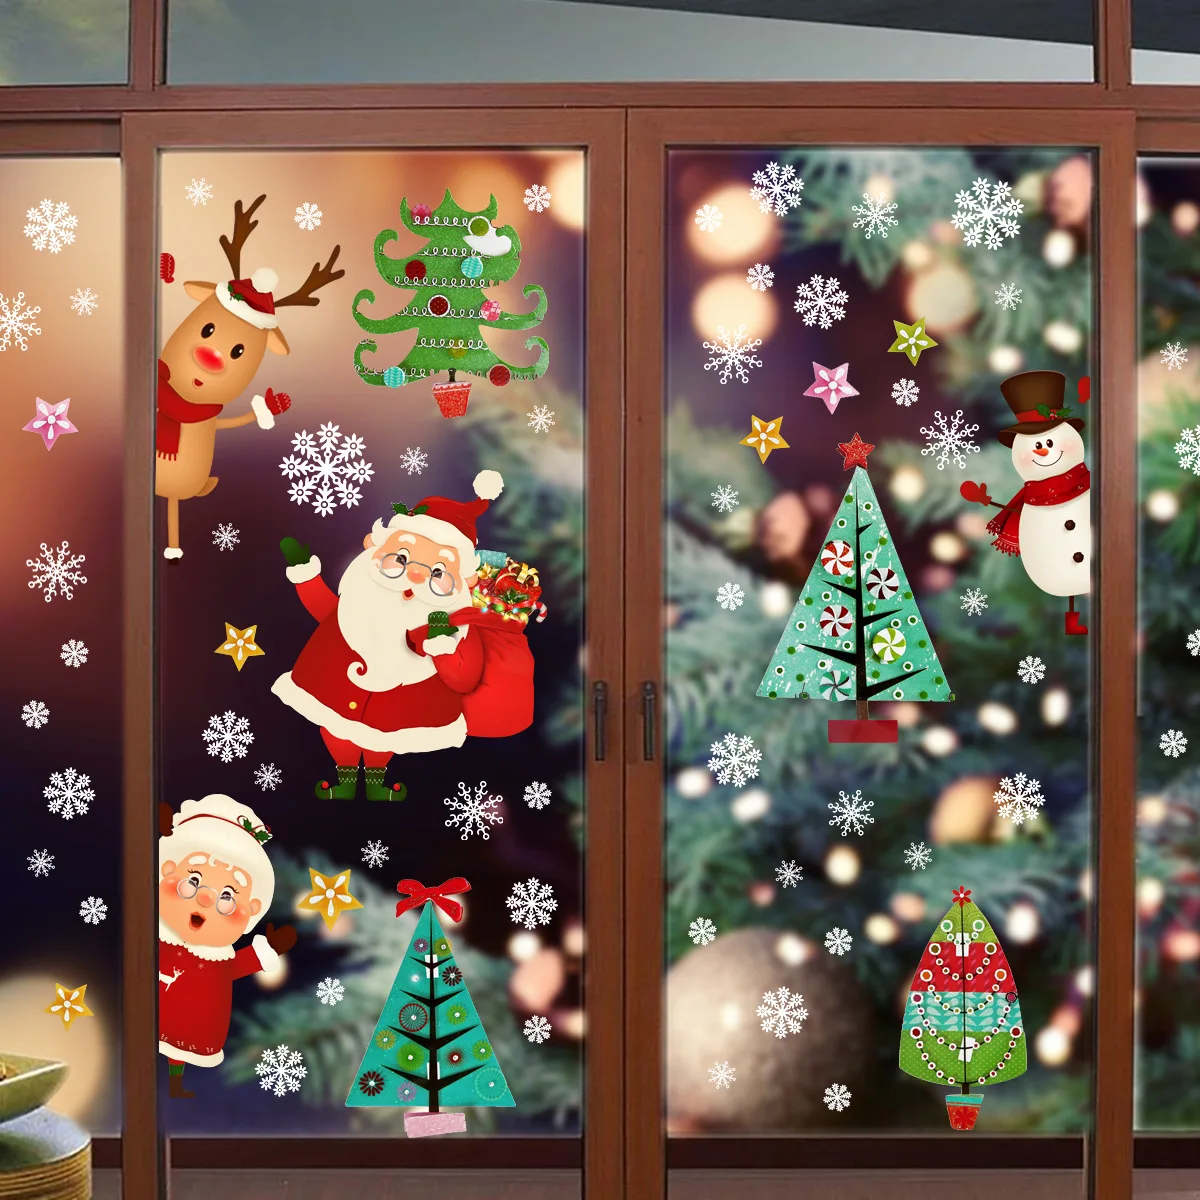 4pcs Santa Claus Snowflake Wall Sticker Christmas Electrostatic Sticker Window Glass Double-sided Decorative Funny Wall Sticker double sided magnet windows cleaner automatic drainage wiper glass window cleaner household cleaning tool for window washing